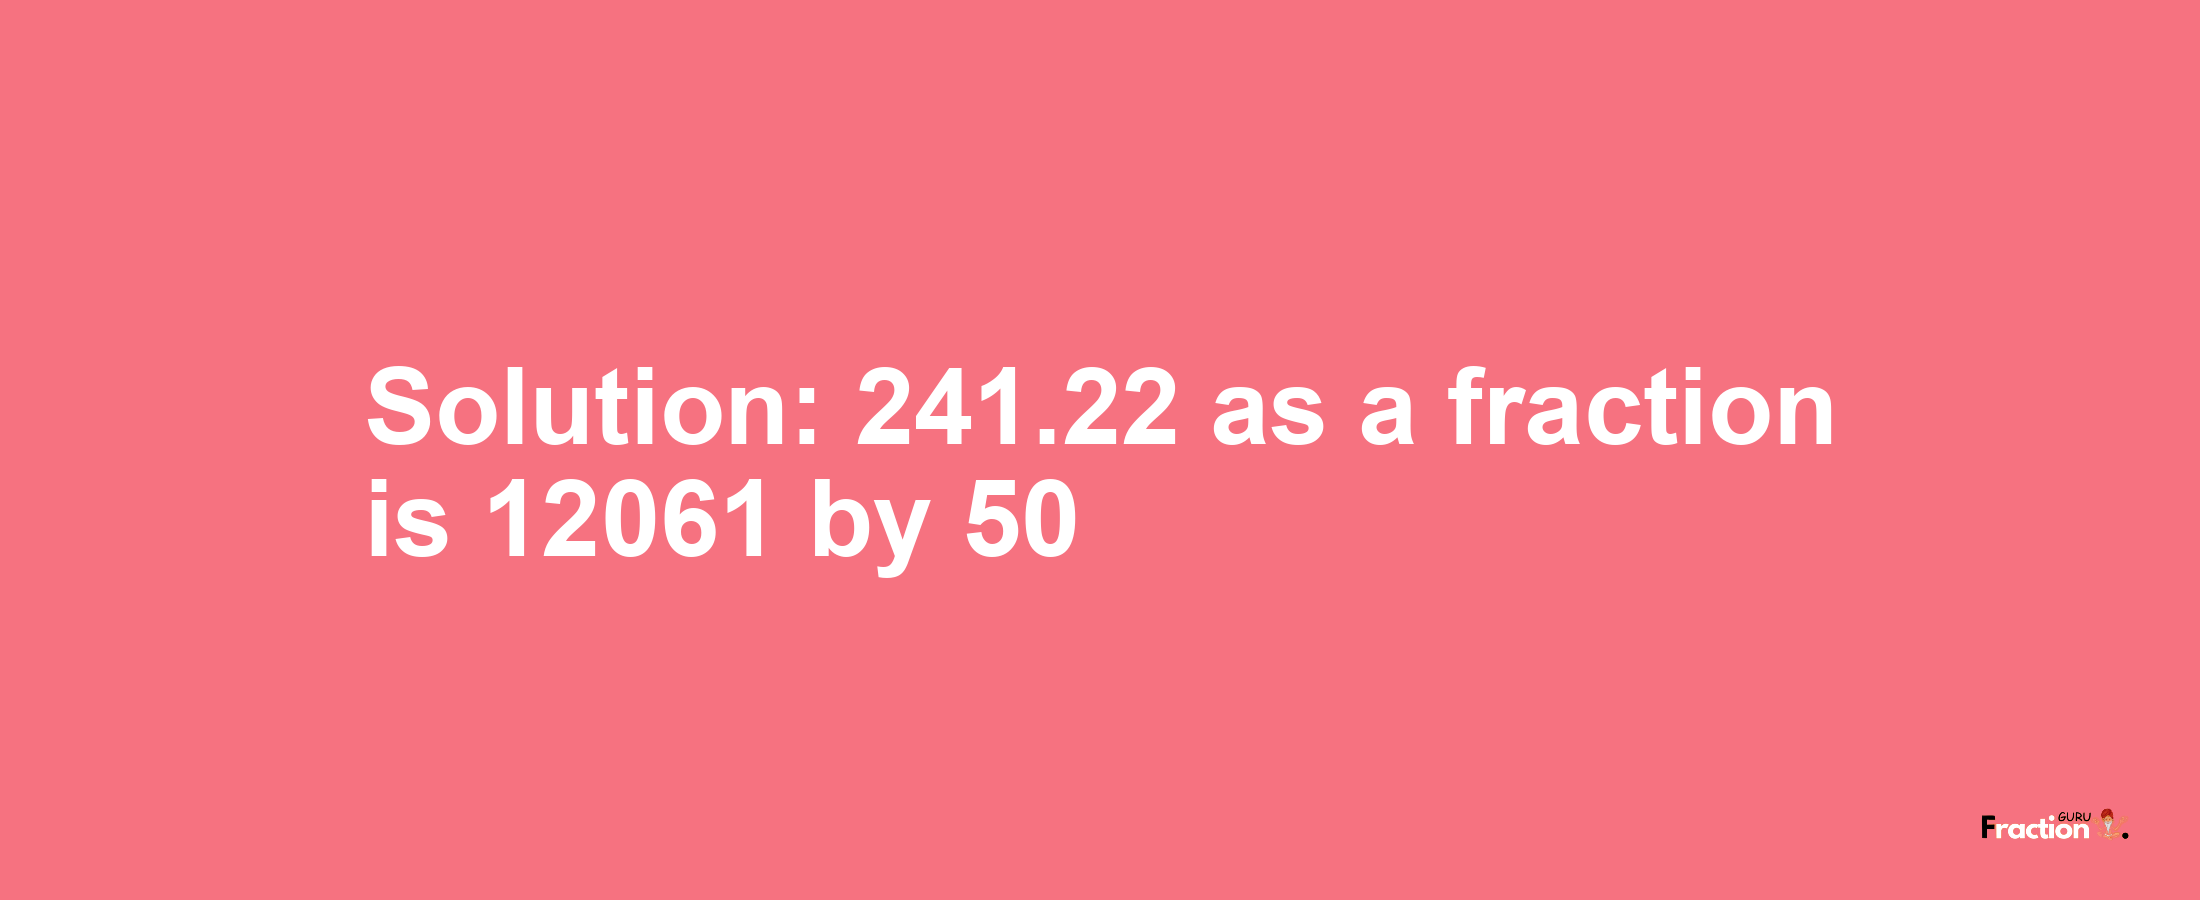 Solution:241.22 as a fraction is 12061/50